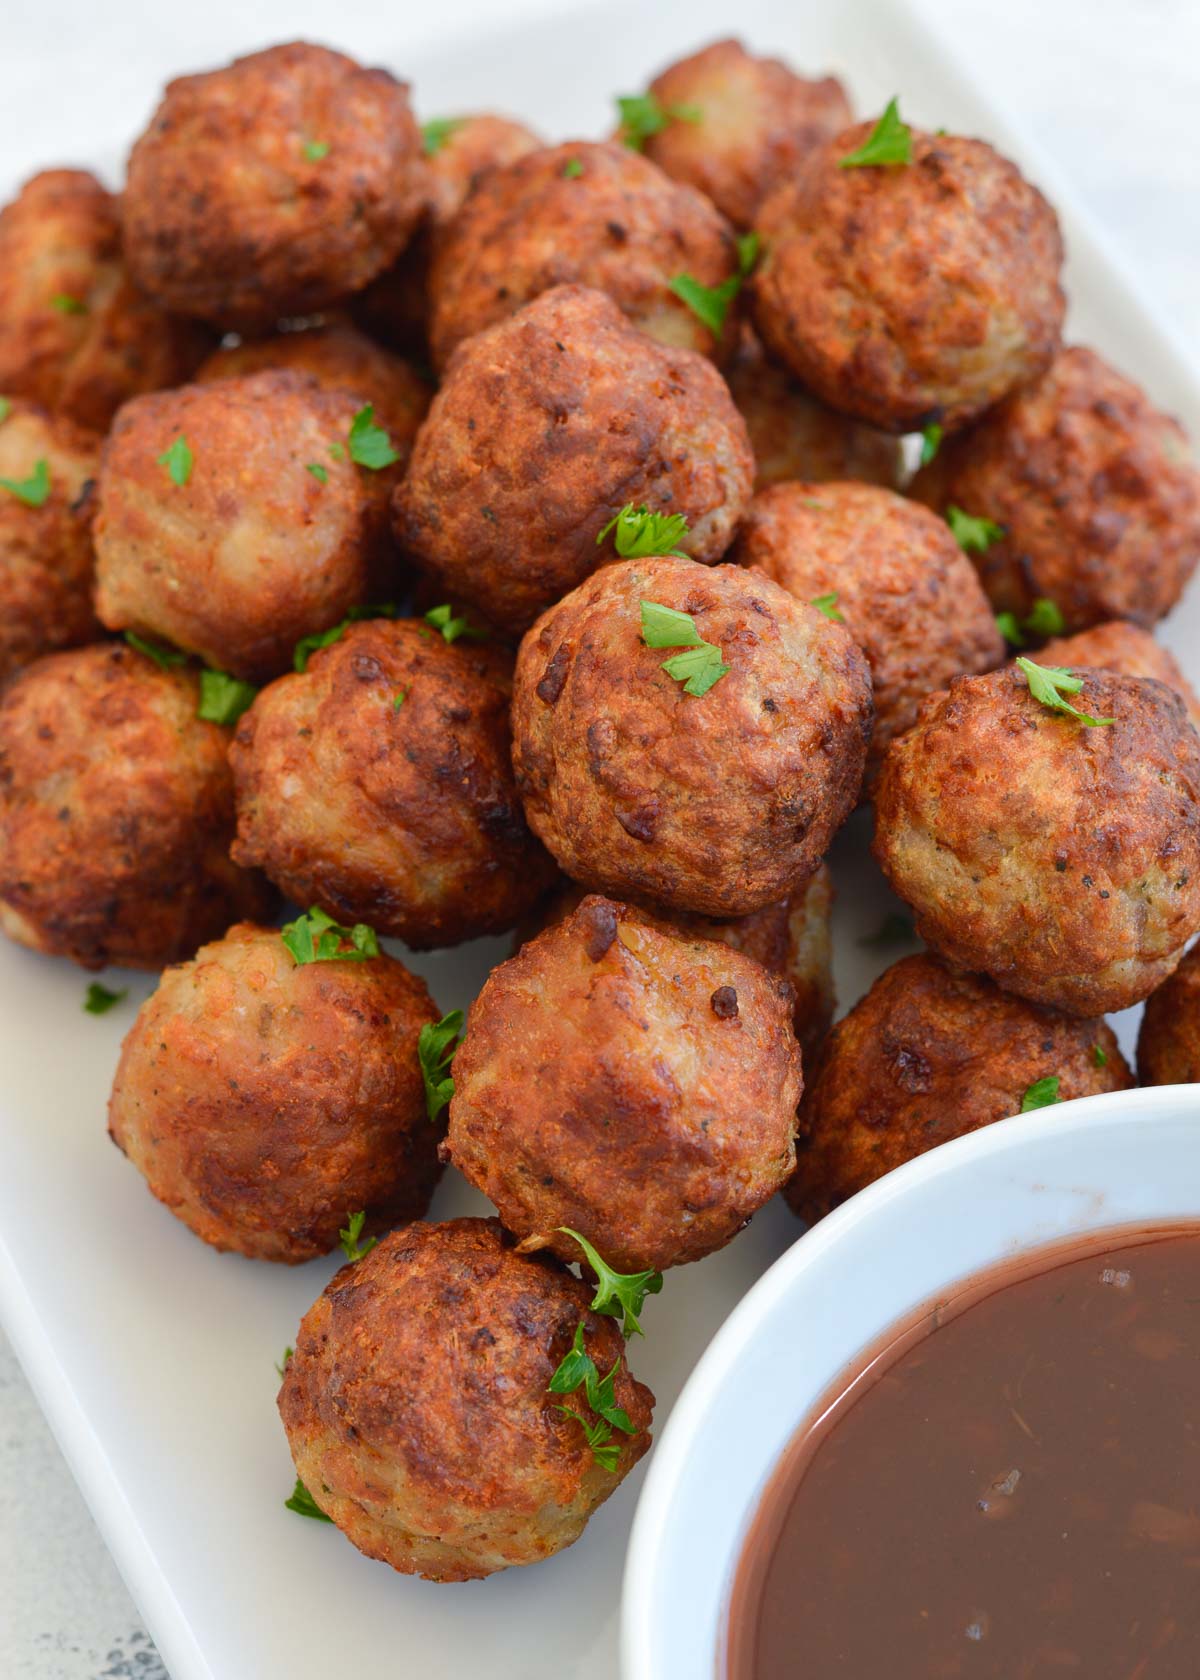 serve un-sauced meatballs with sauce on the side for dipping!